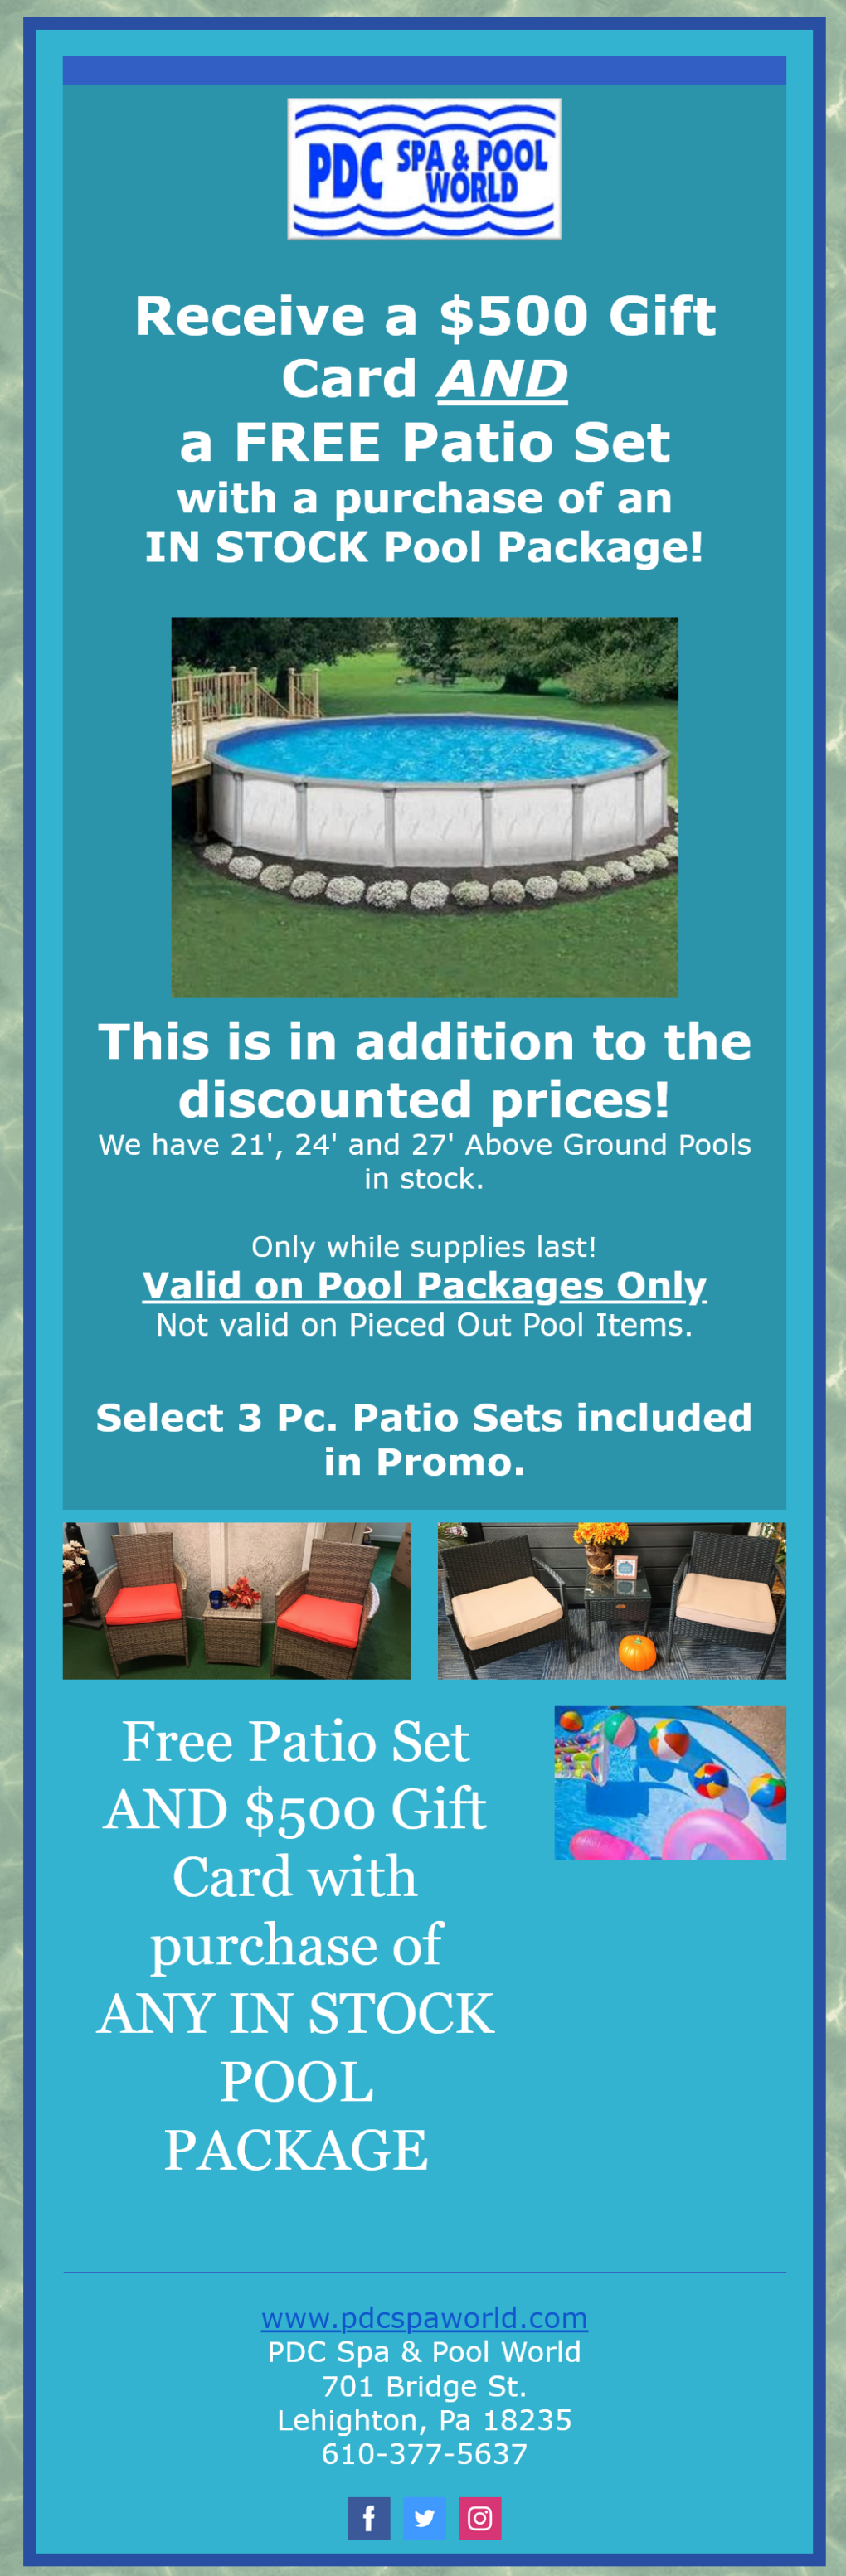 Receive a $500 Gift Card AND a FREE Patio Set with a purchase of an IN STOCK Pool Package! This is in addition to the discounted prices!